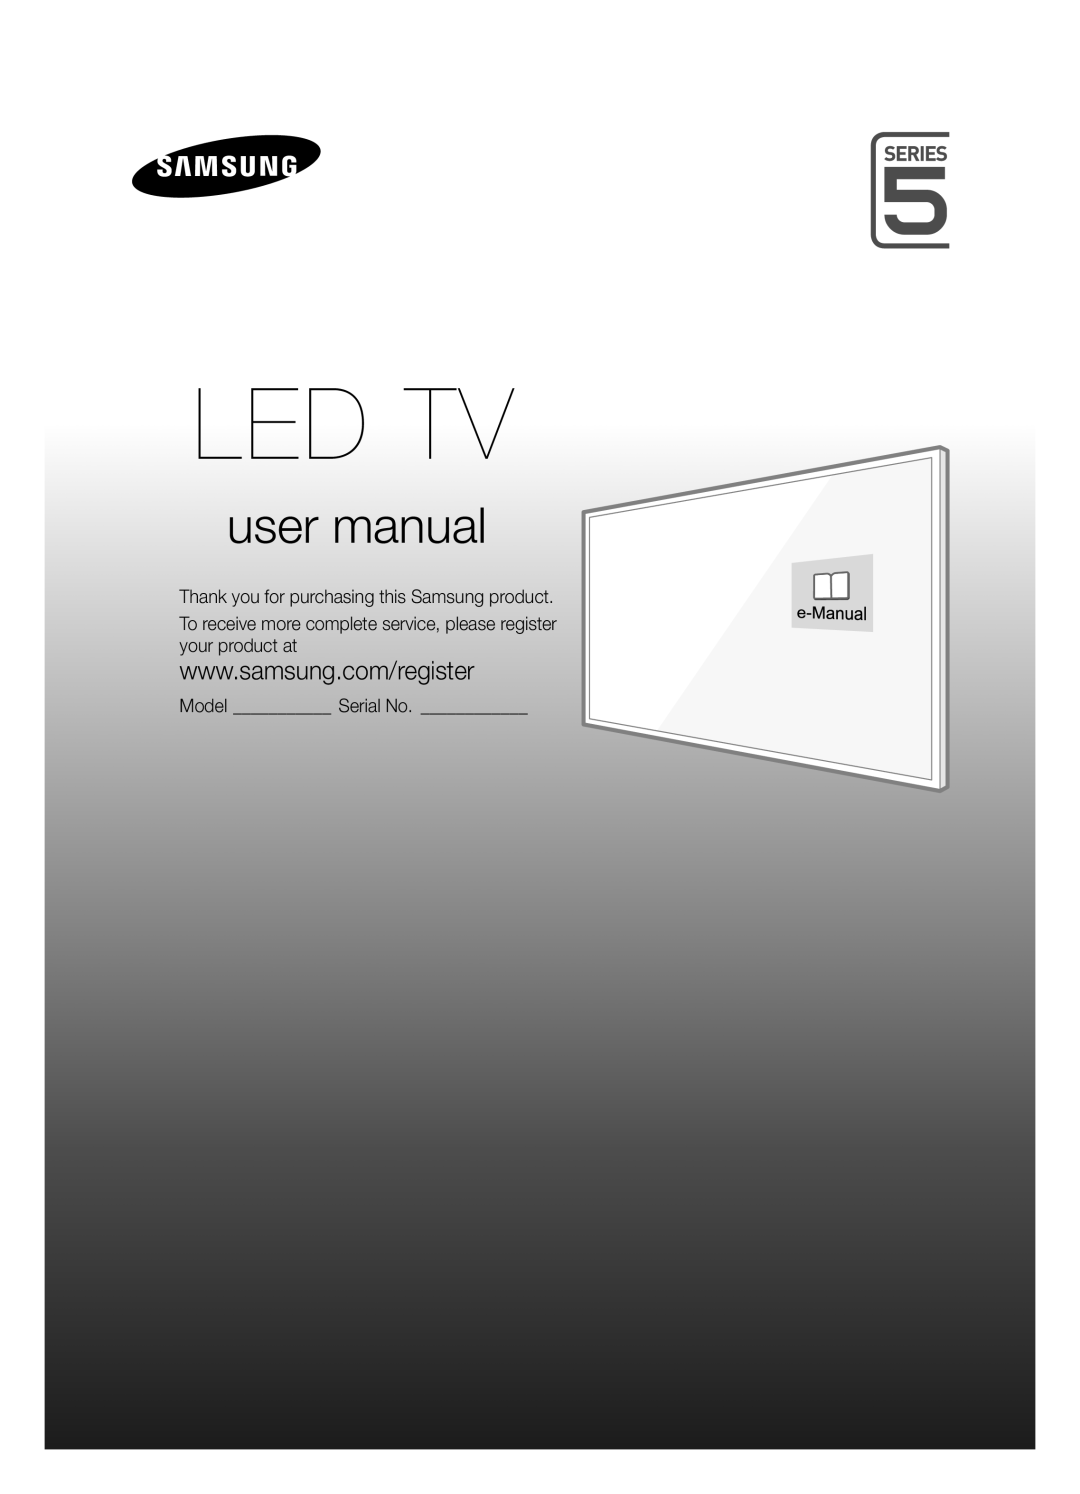 Samsung UE32J5570SUXTK manual Led Tv, user manual, Thank you for purchasing this Samsung product, Model Serial No 